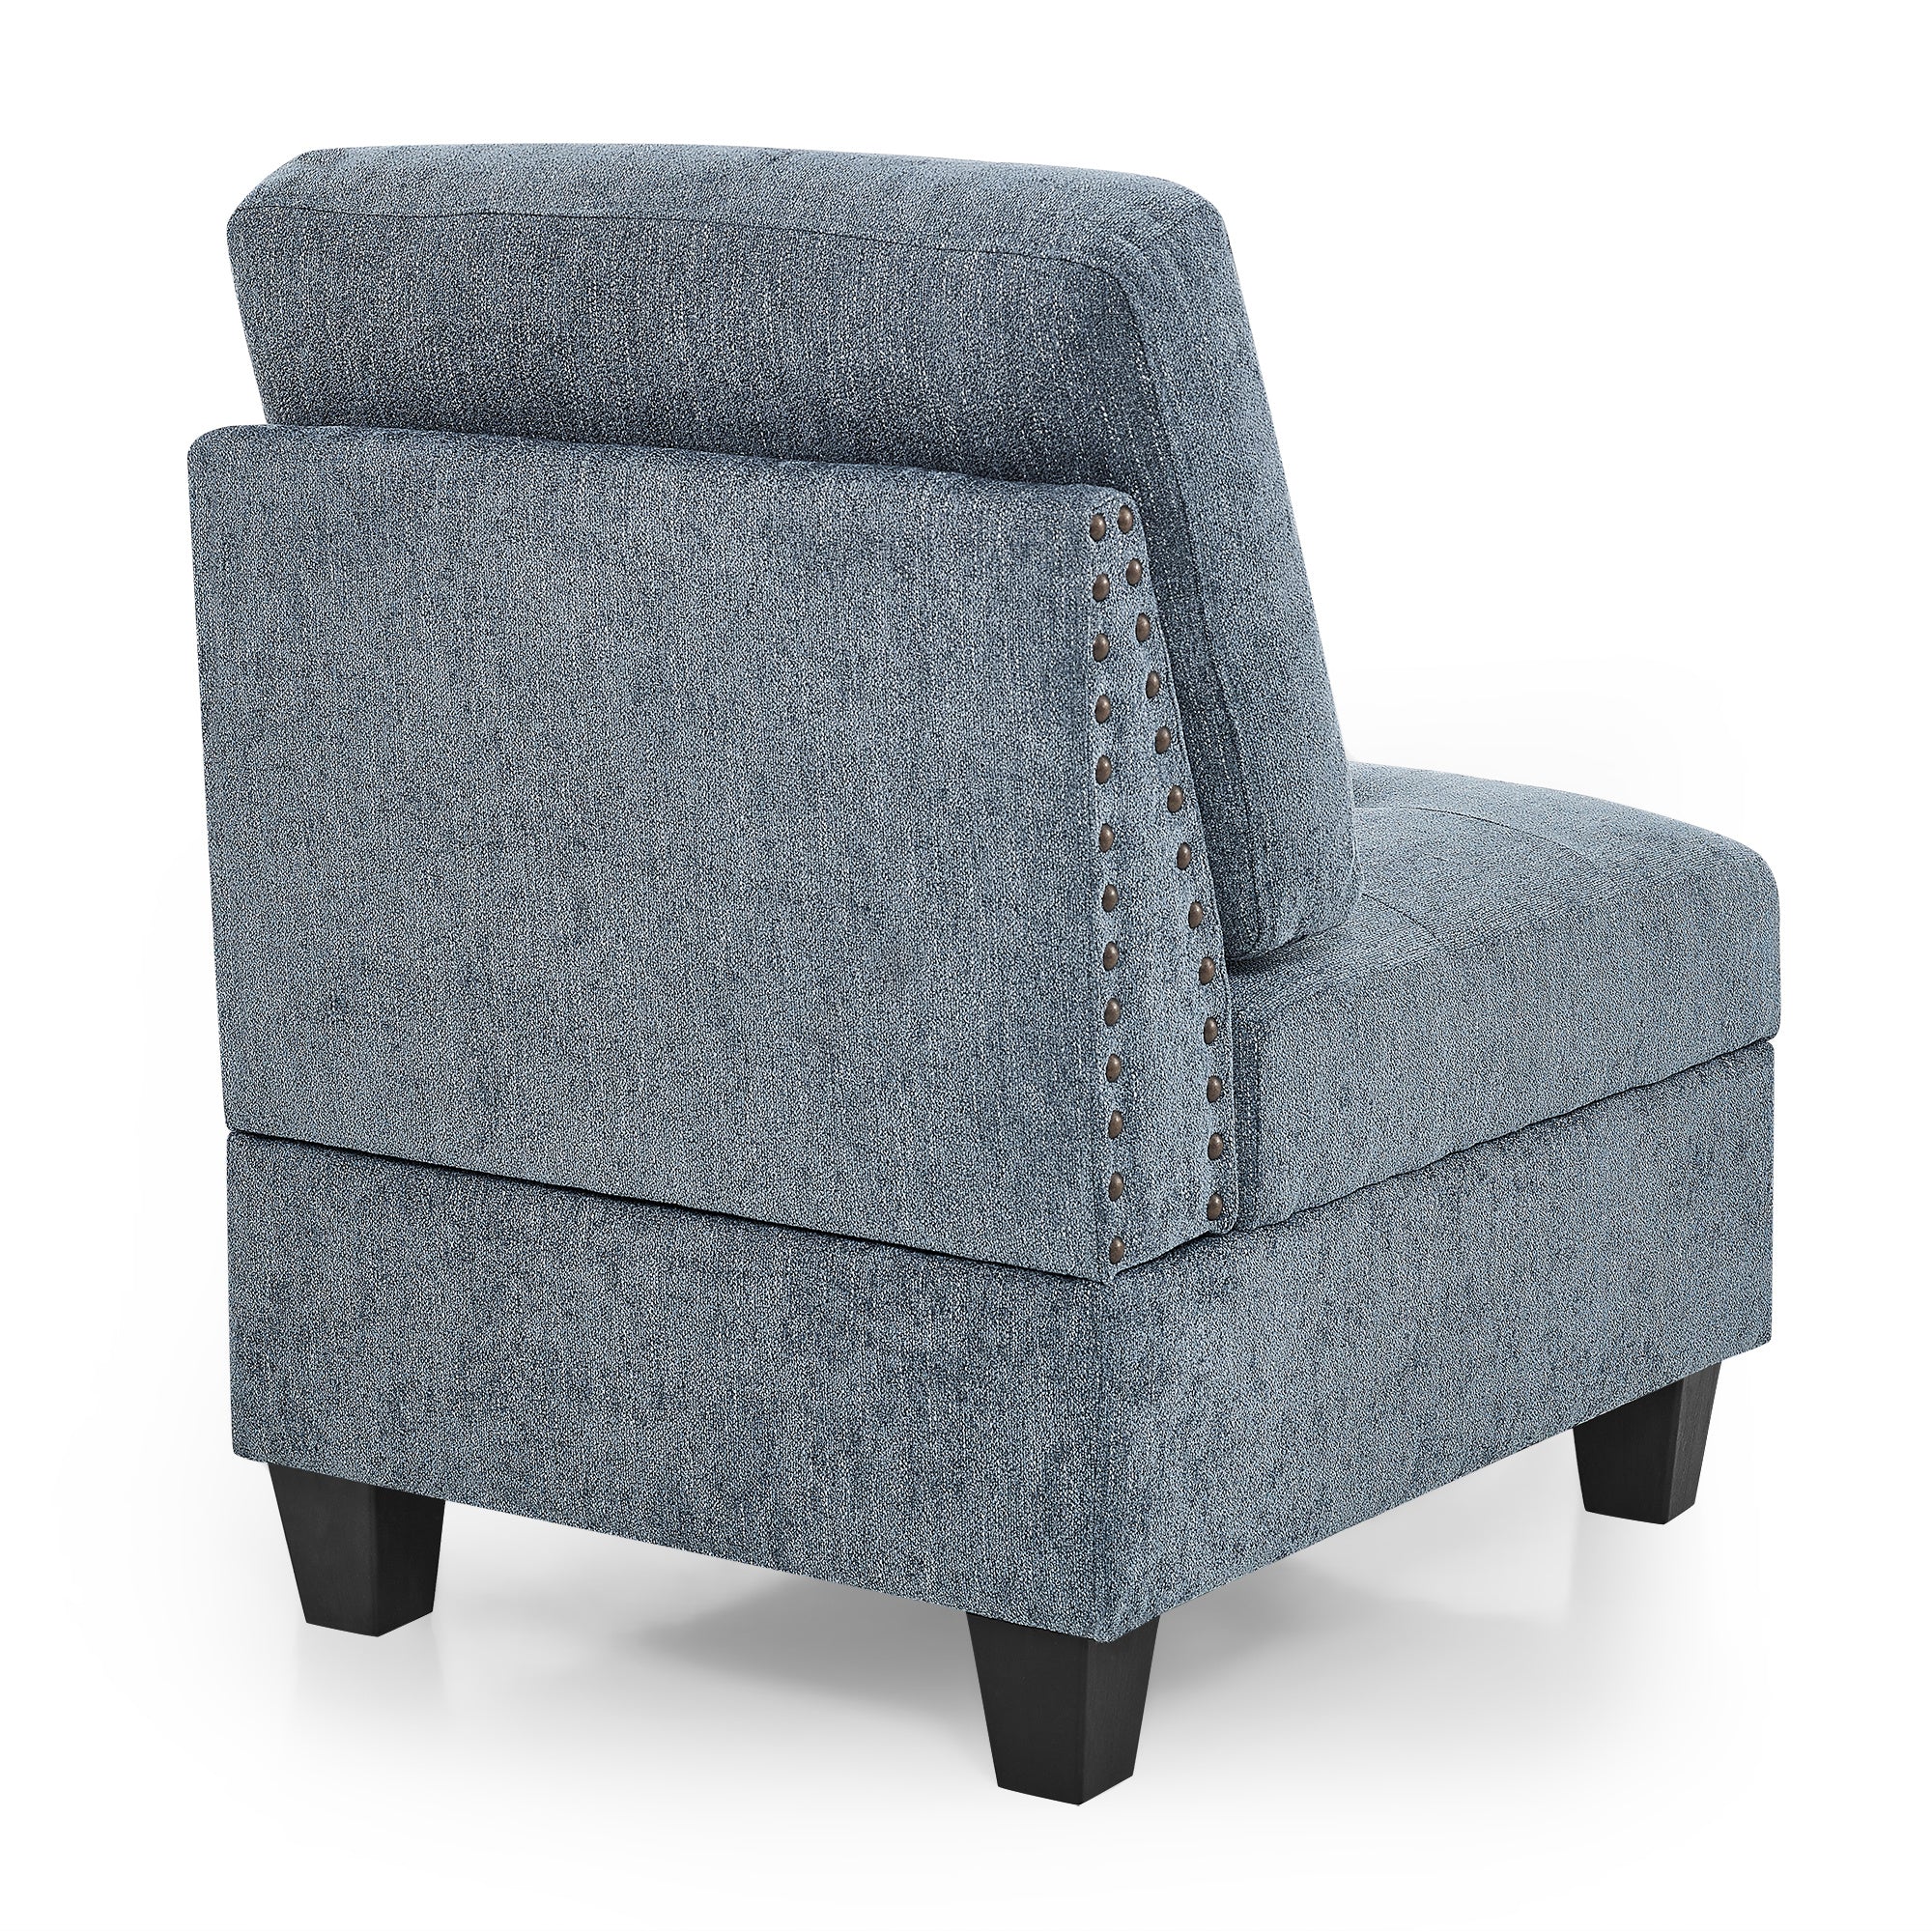 Single Chair for Modular Sectional - Navy (26.5"x31.5"x36")